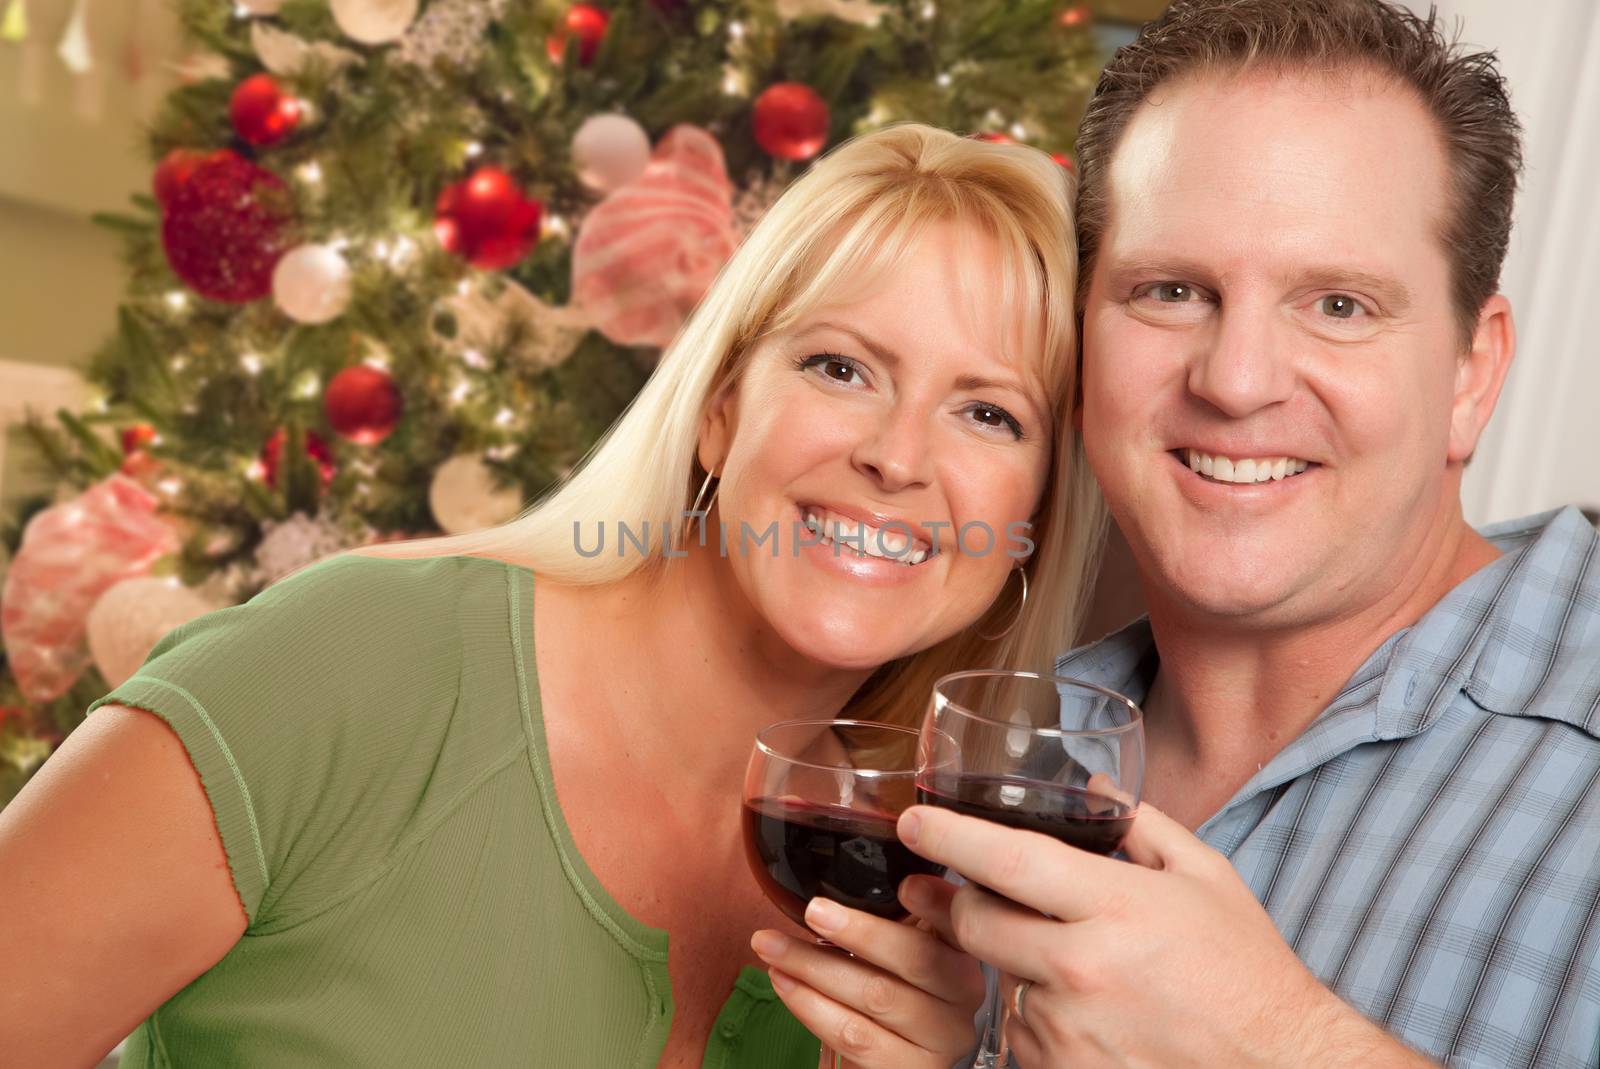 Caucasian Couple Holding Wine Glasses In Front of Decorated Christmas Tree. by Feverpitched